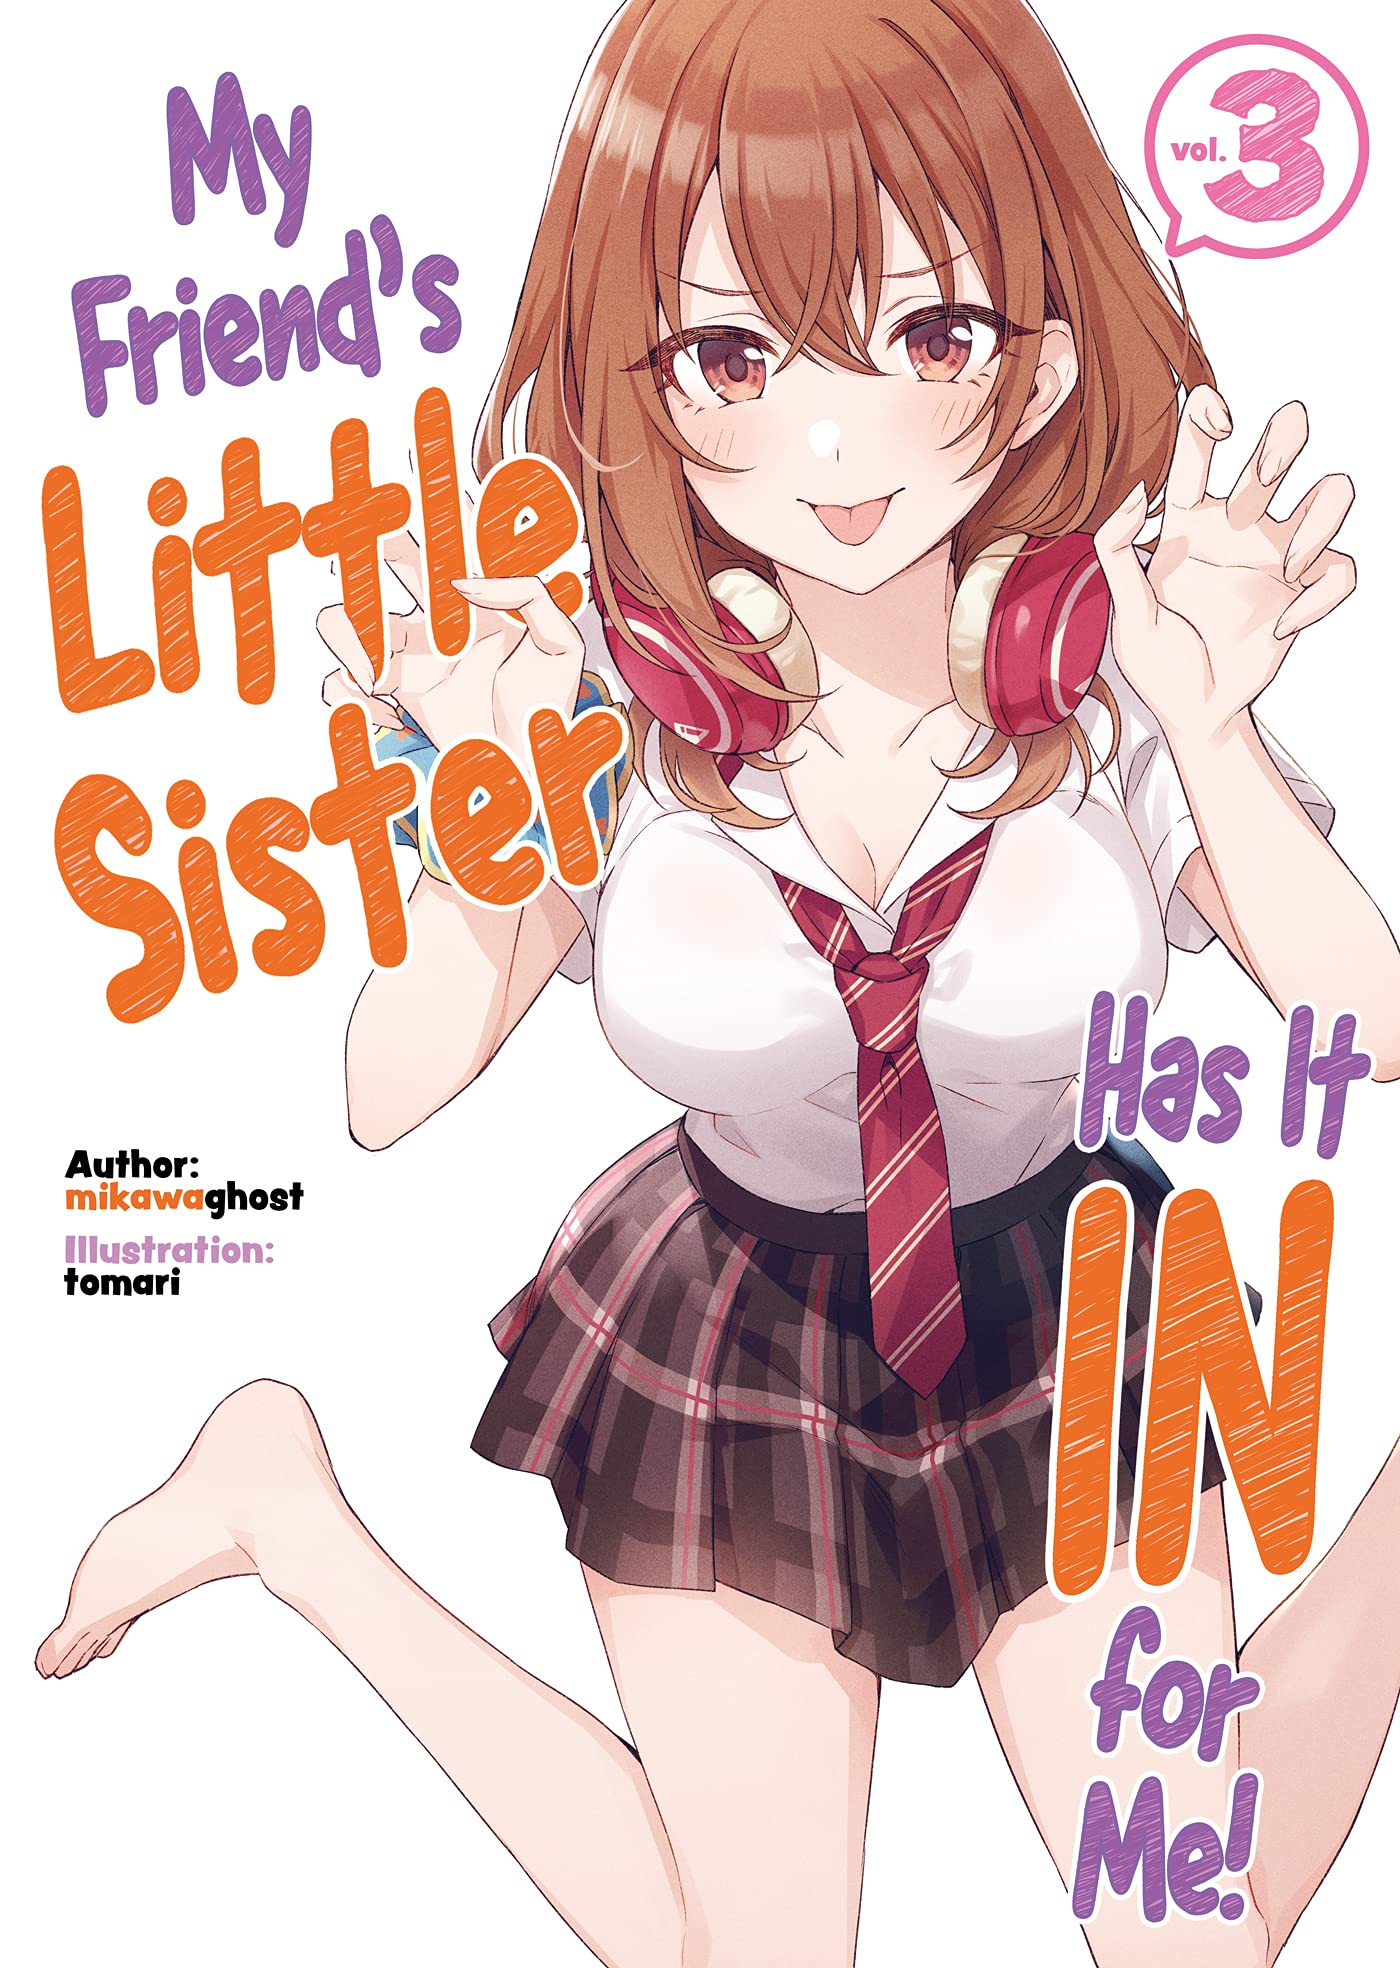 My Friend's Little Sister Has It in for Me! Volume 03